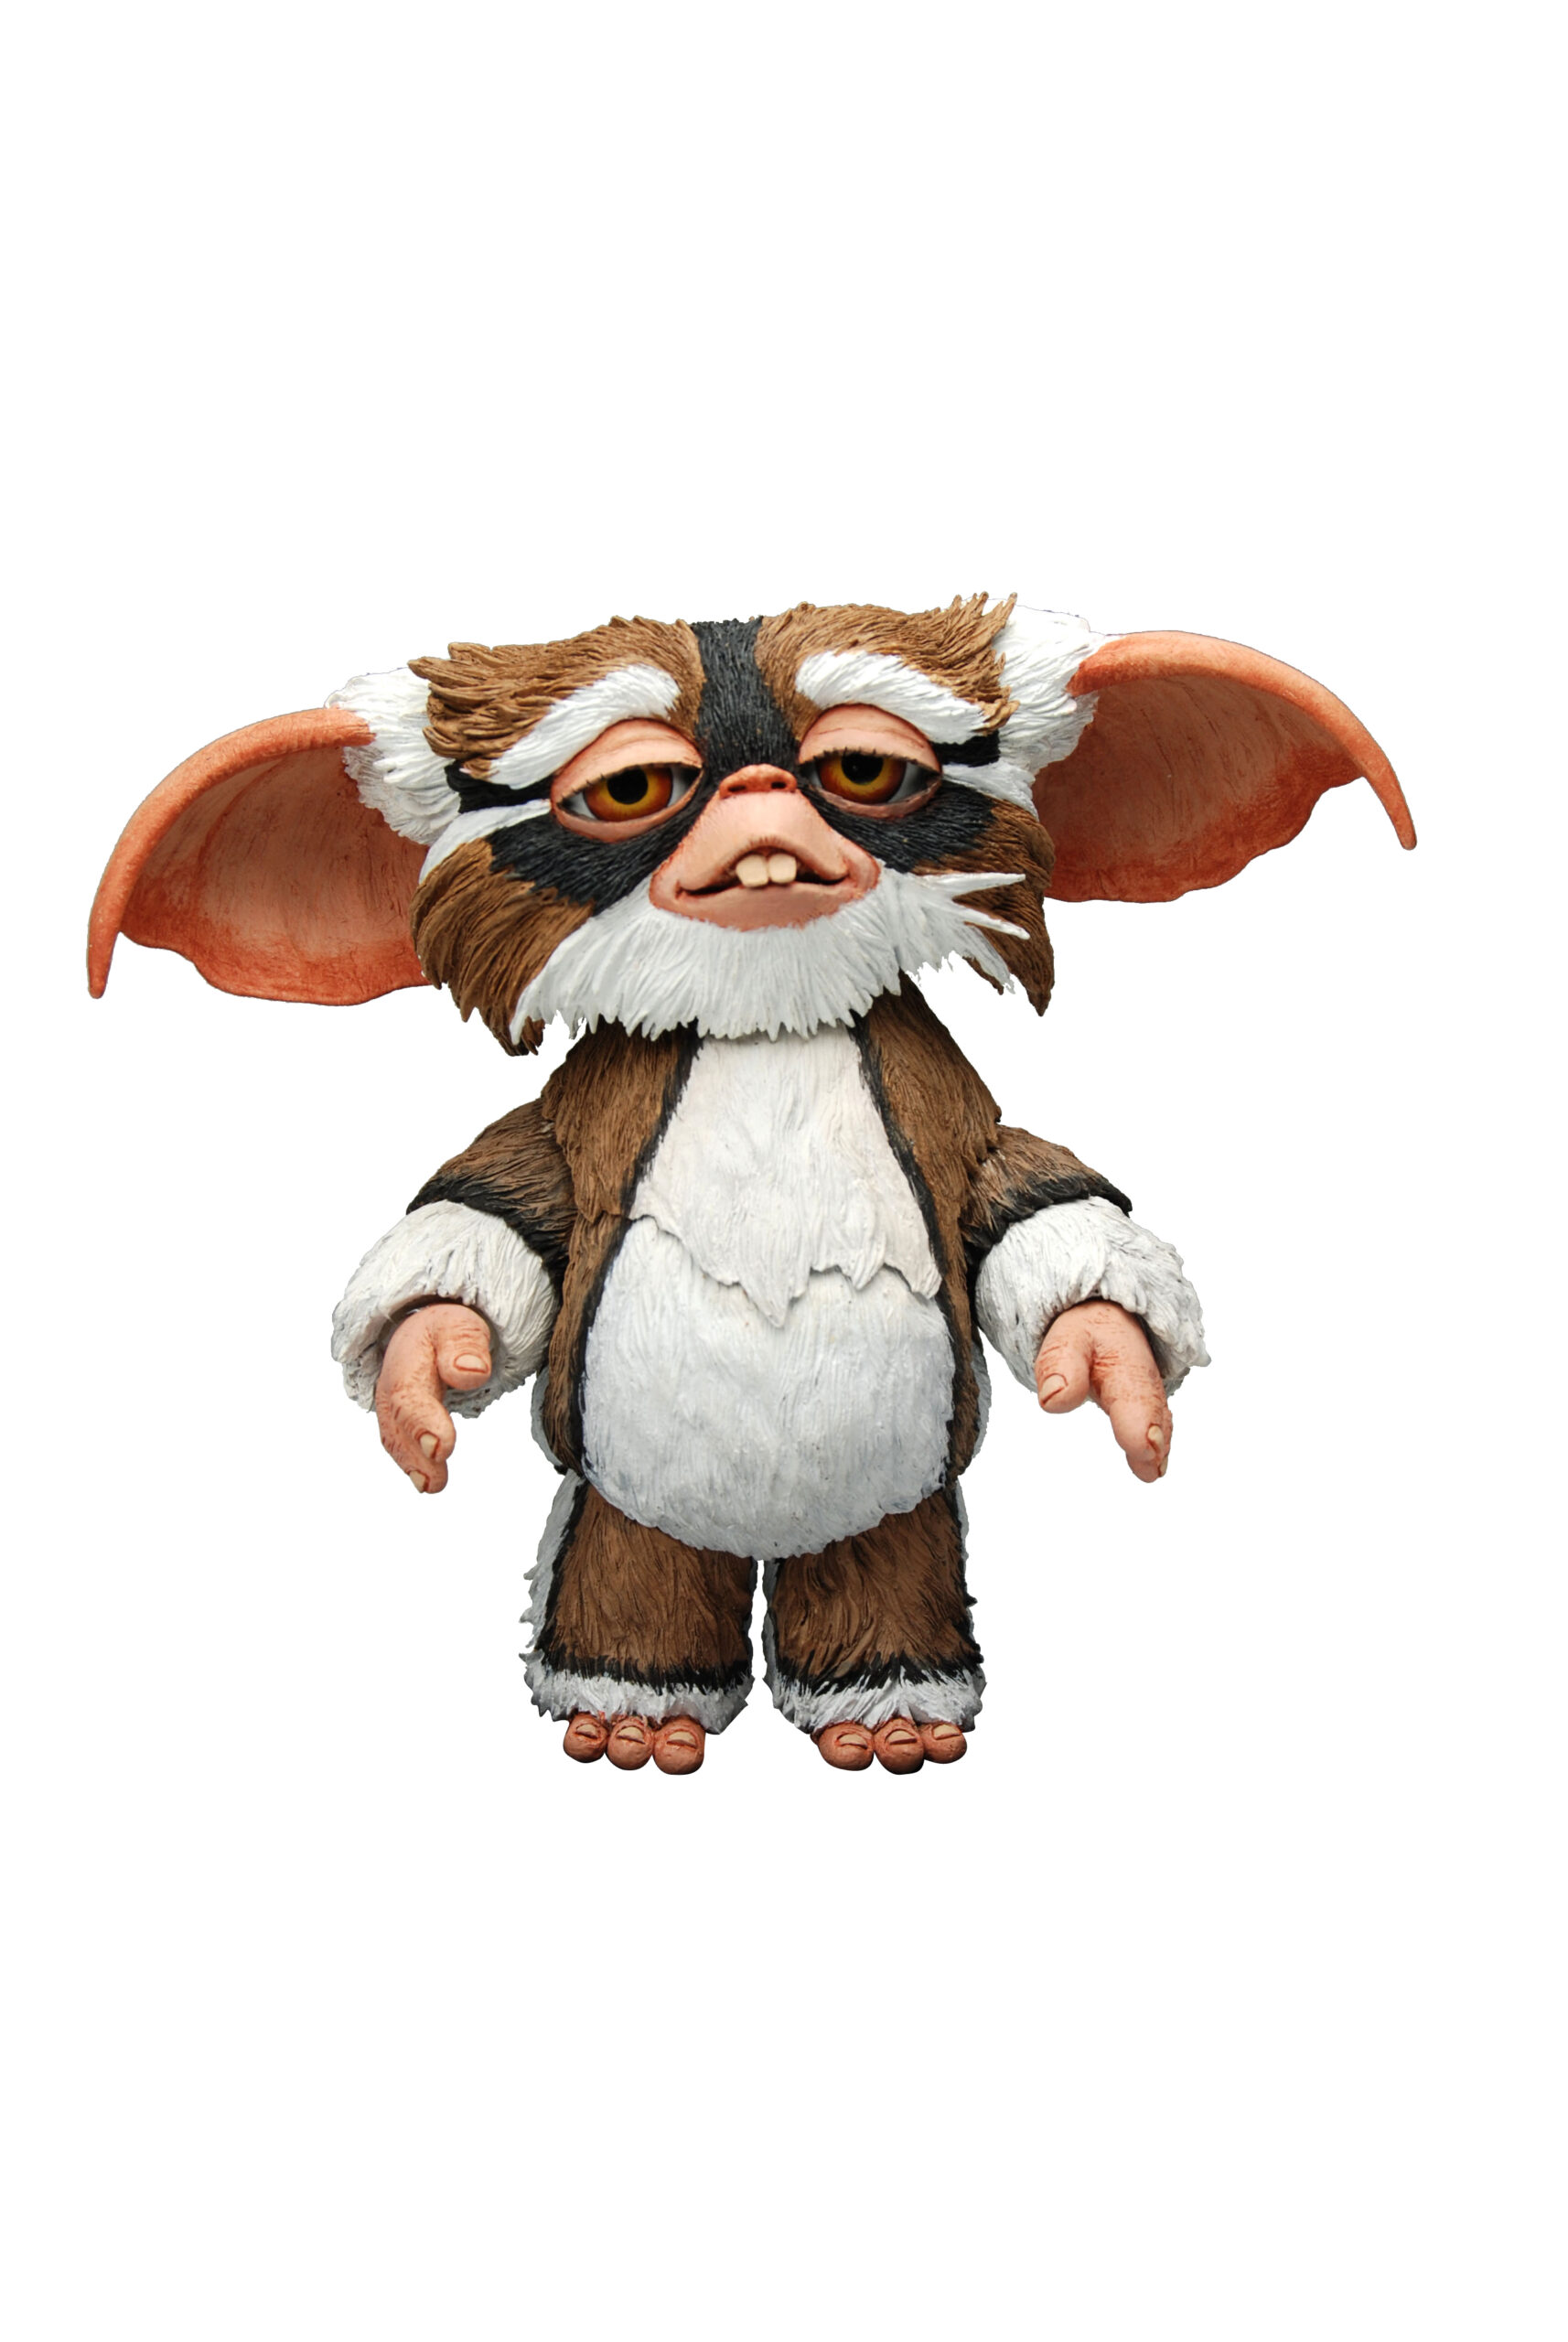 Gremlins 2: The New Batch - Lenny 7" Action Figure